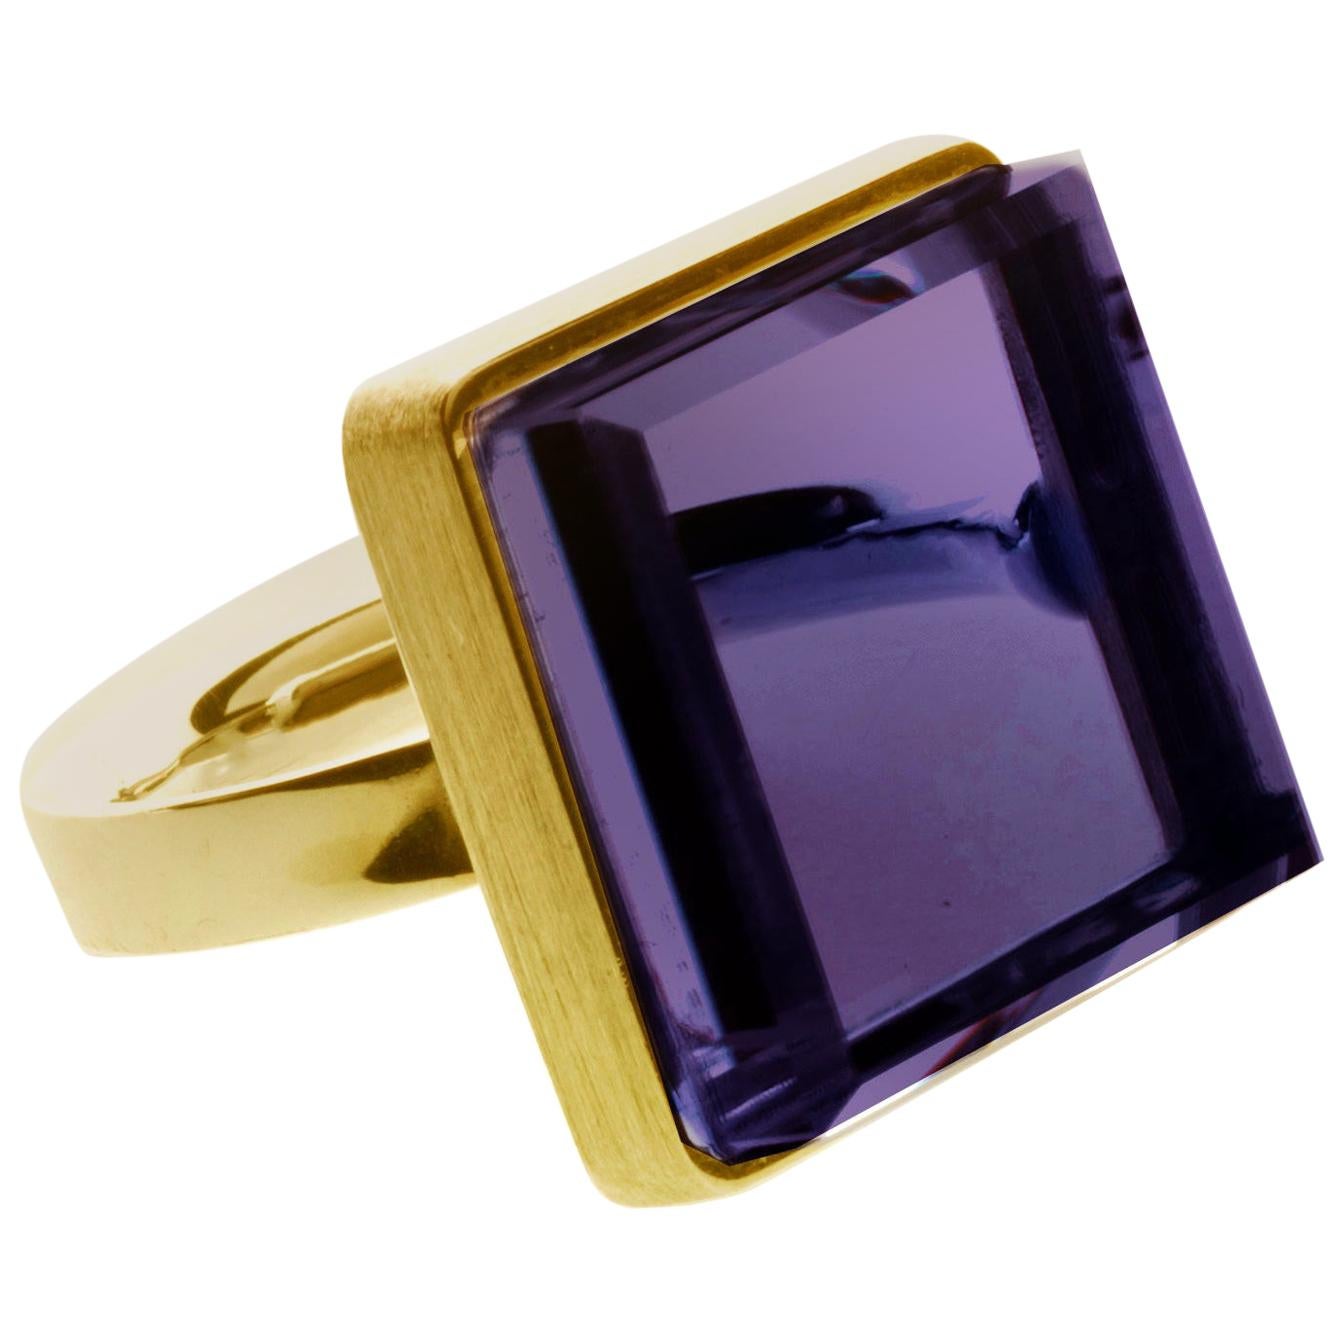 Featured in Vogue Rose Gold Art Deco Style Men Ring with Dark Amethyst